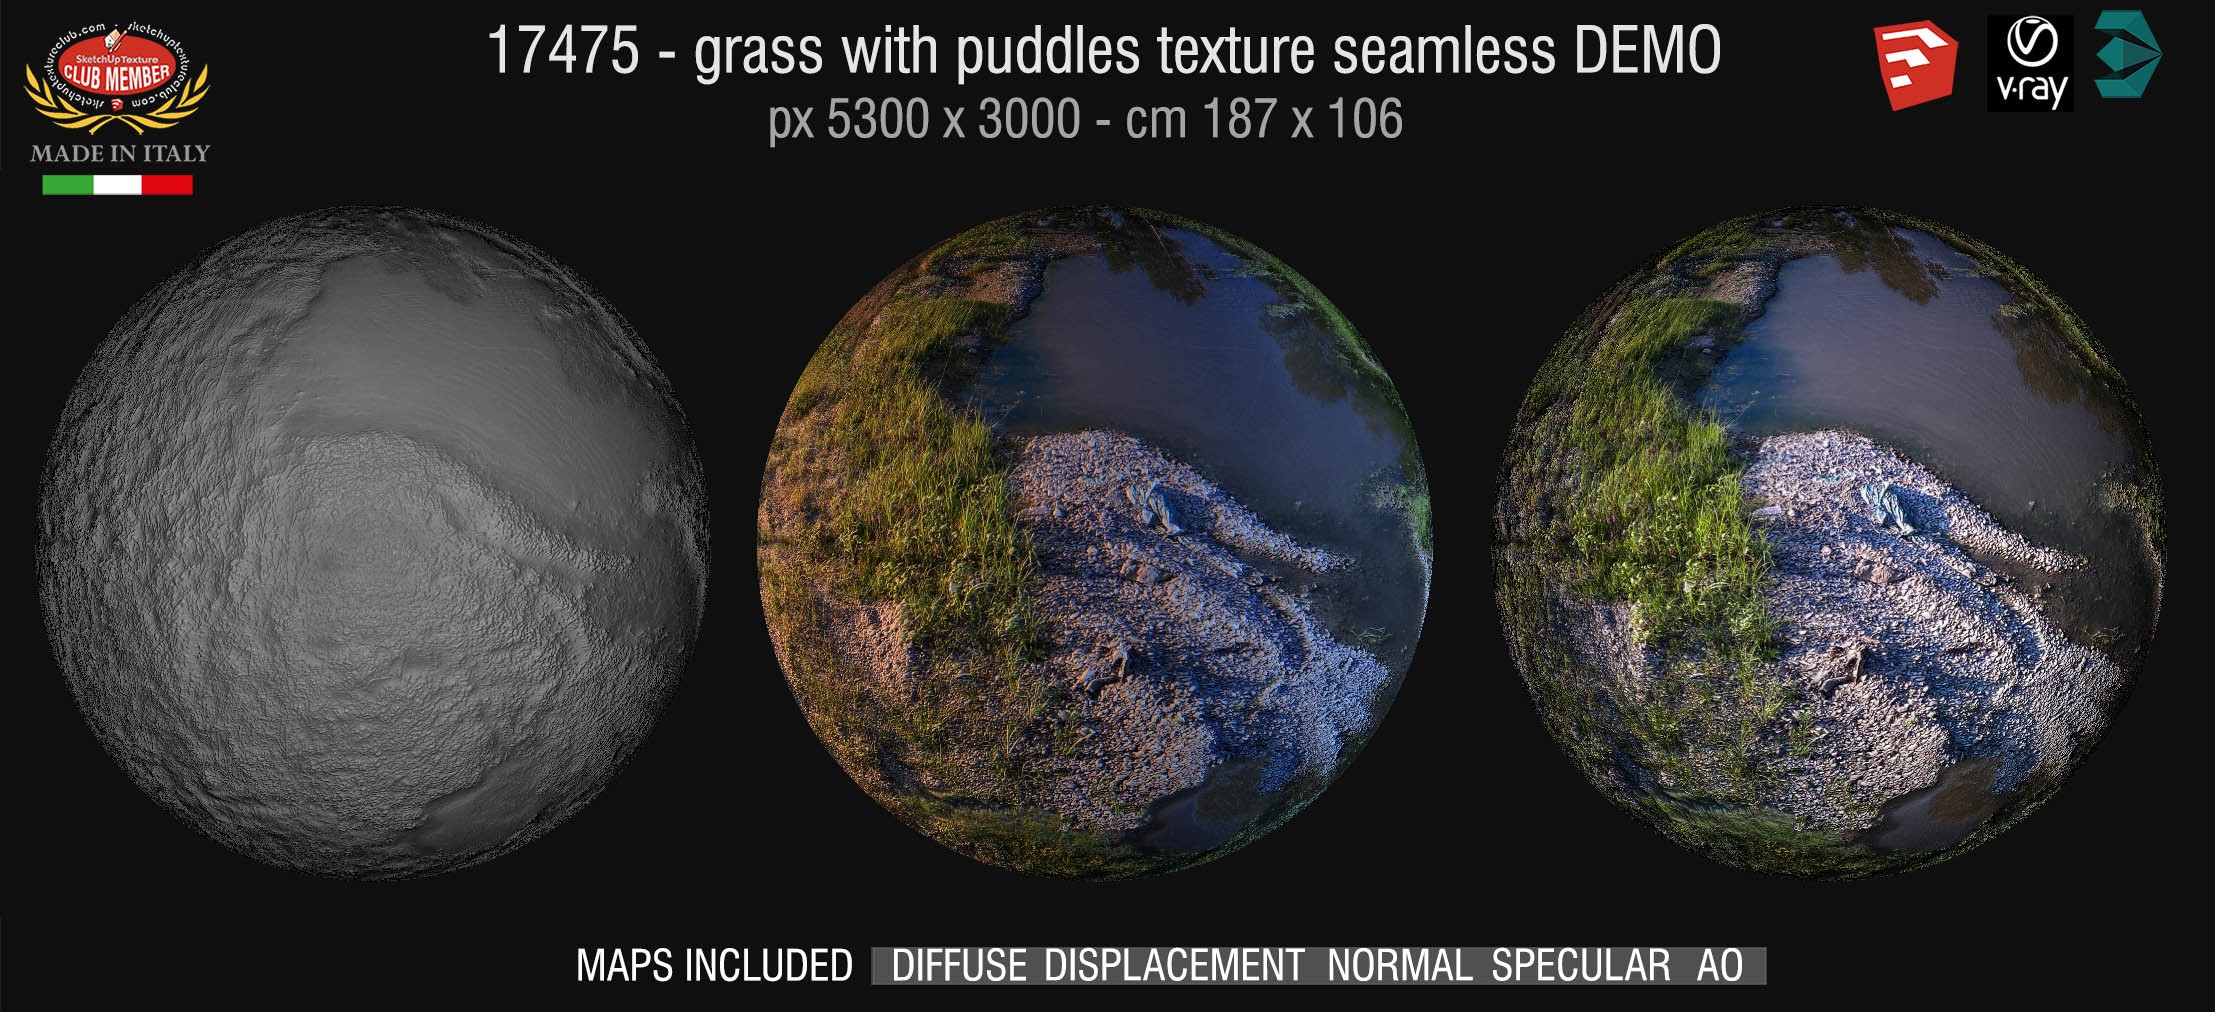 17475 HR Grass with puddles texture + maps DEMO